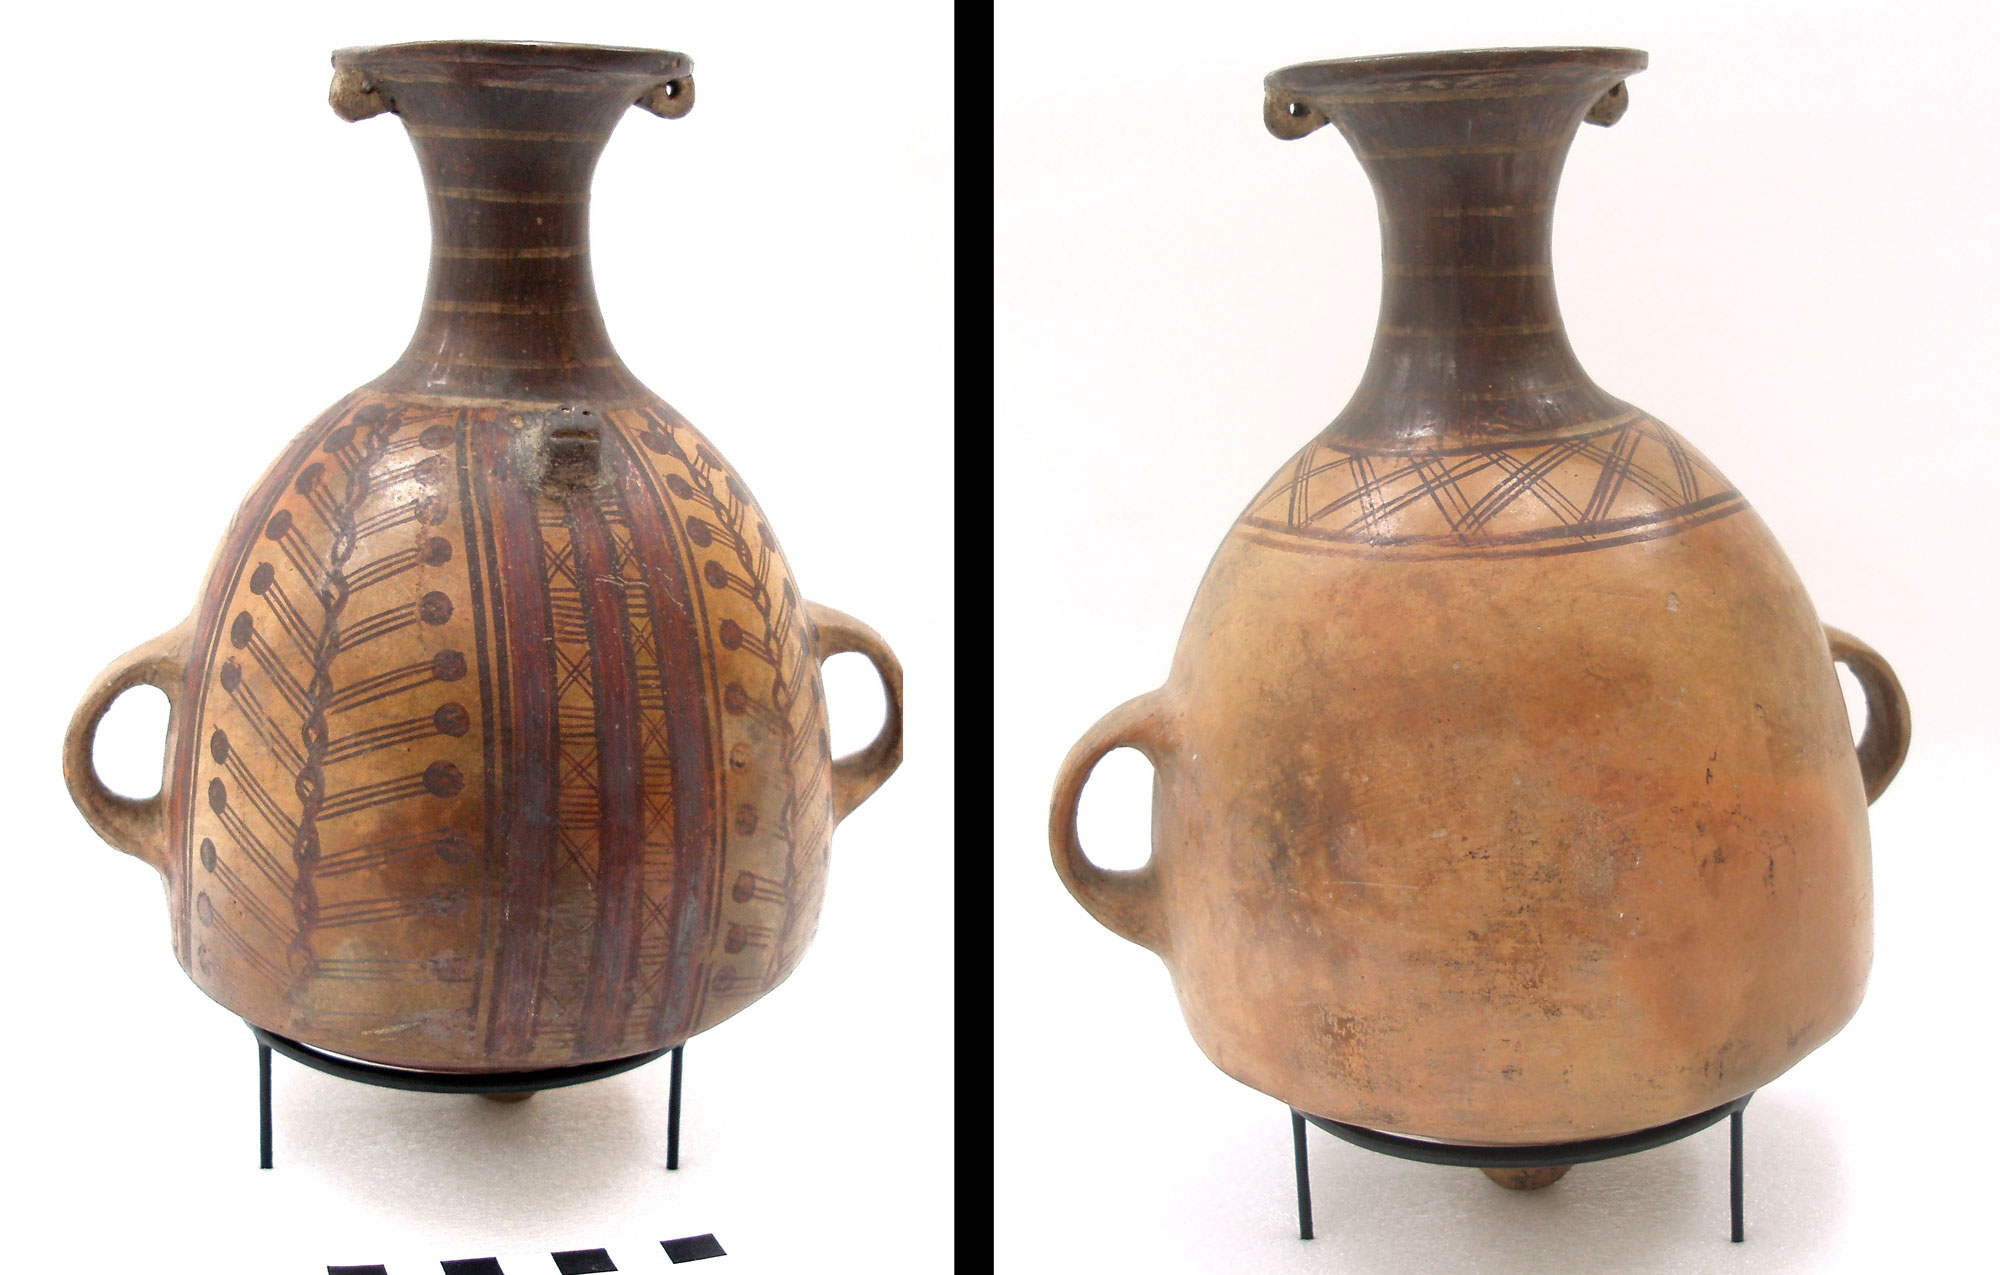 2-Panel figure showing two aryballos, ceramic vessels for holding chicha or other drinks or foods. The vessels each have a flared neck and ovate vase with two side handles. One vase is highly decorated with abstract designs, whereas the other has minimal decoration.